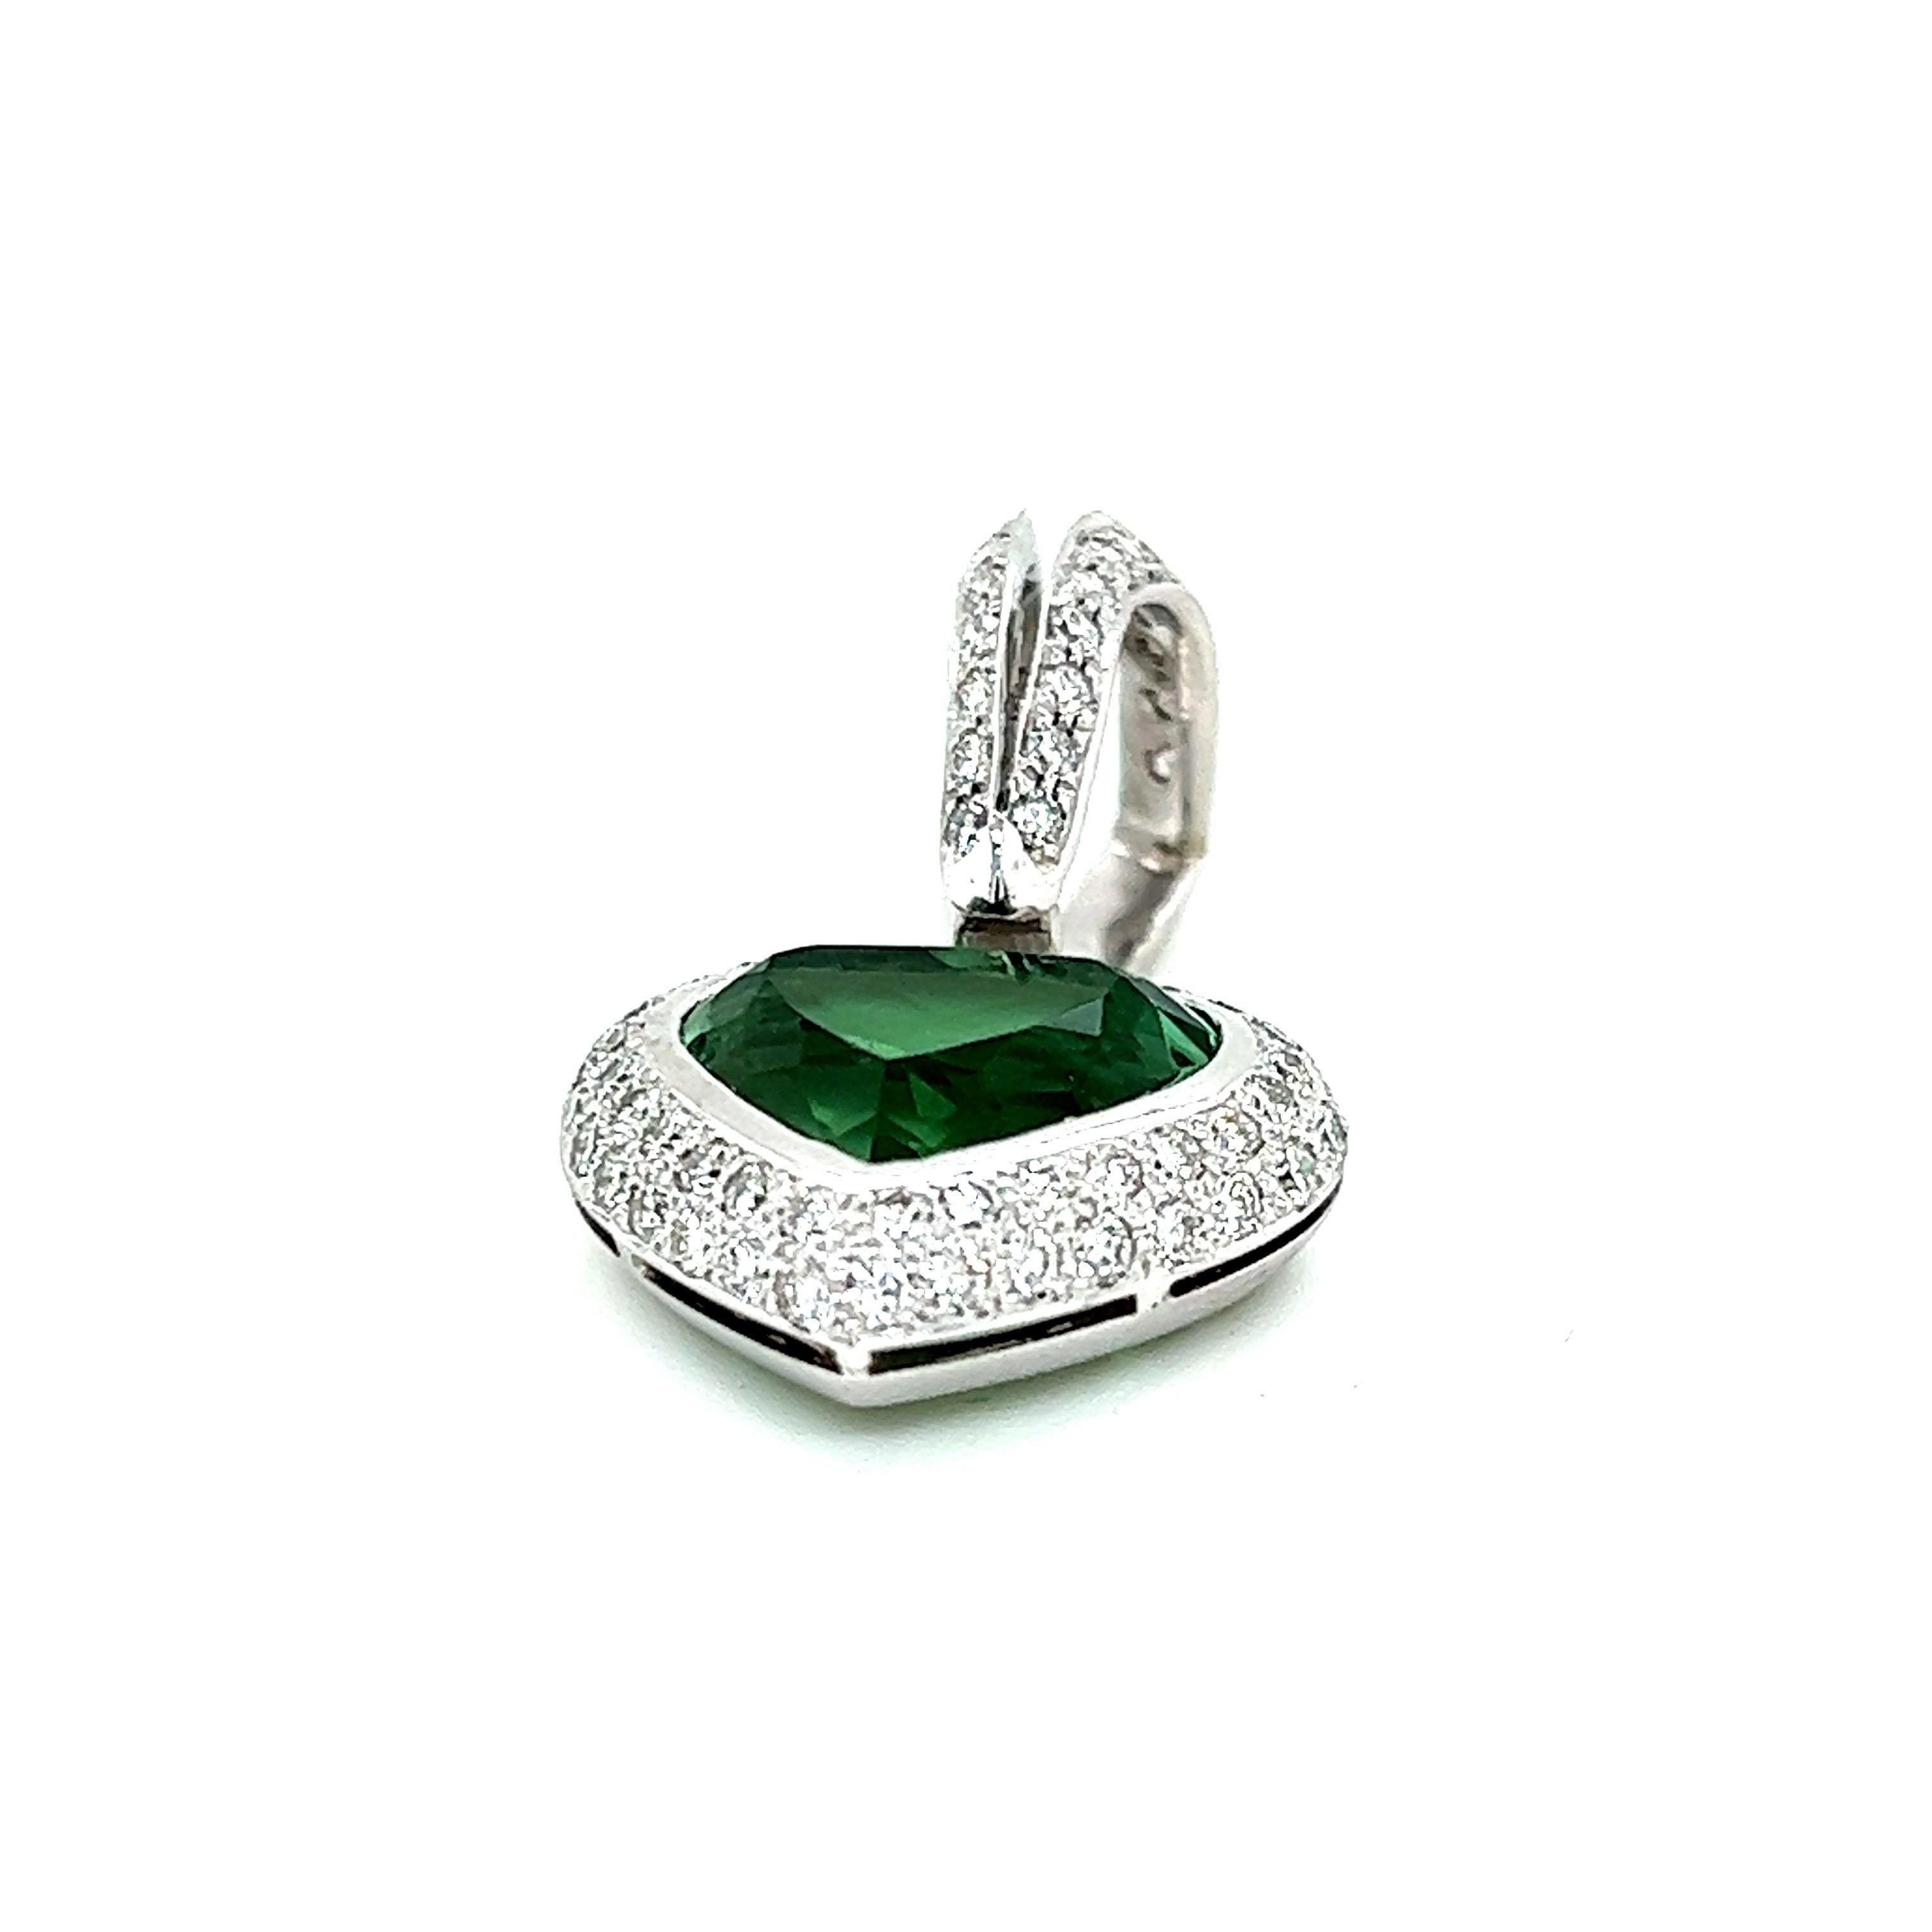 18k White Gold Green Tourmaline and Diamond Heart Pendant.

Height of the pendant with bail approx. 32mm
Width approx. 18.20mm
Green tourmaline heart approx. 12.32x10.5mm
